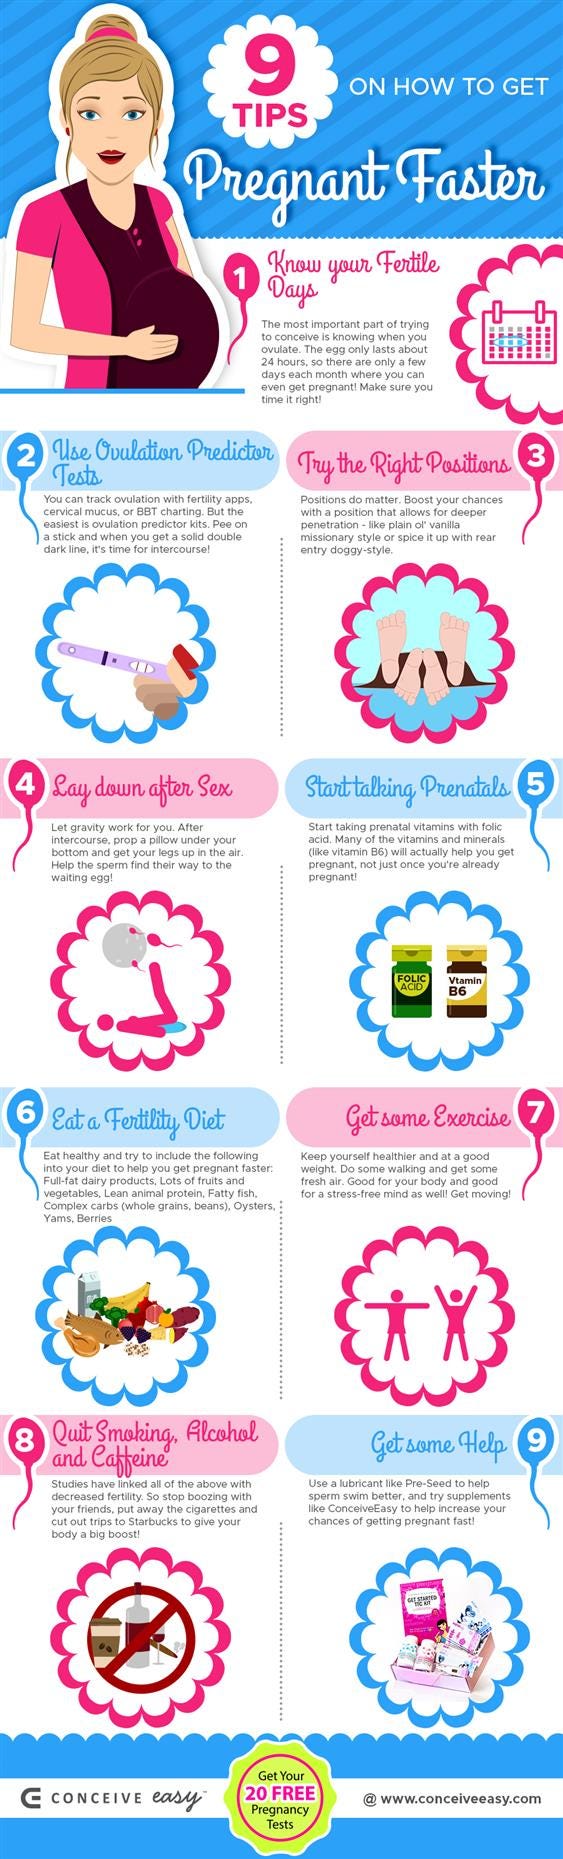 9 tips on how to get pregnant fast infographic – conceive easy – medium